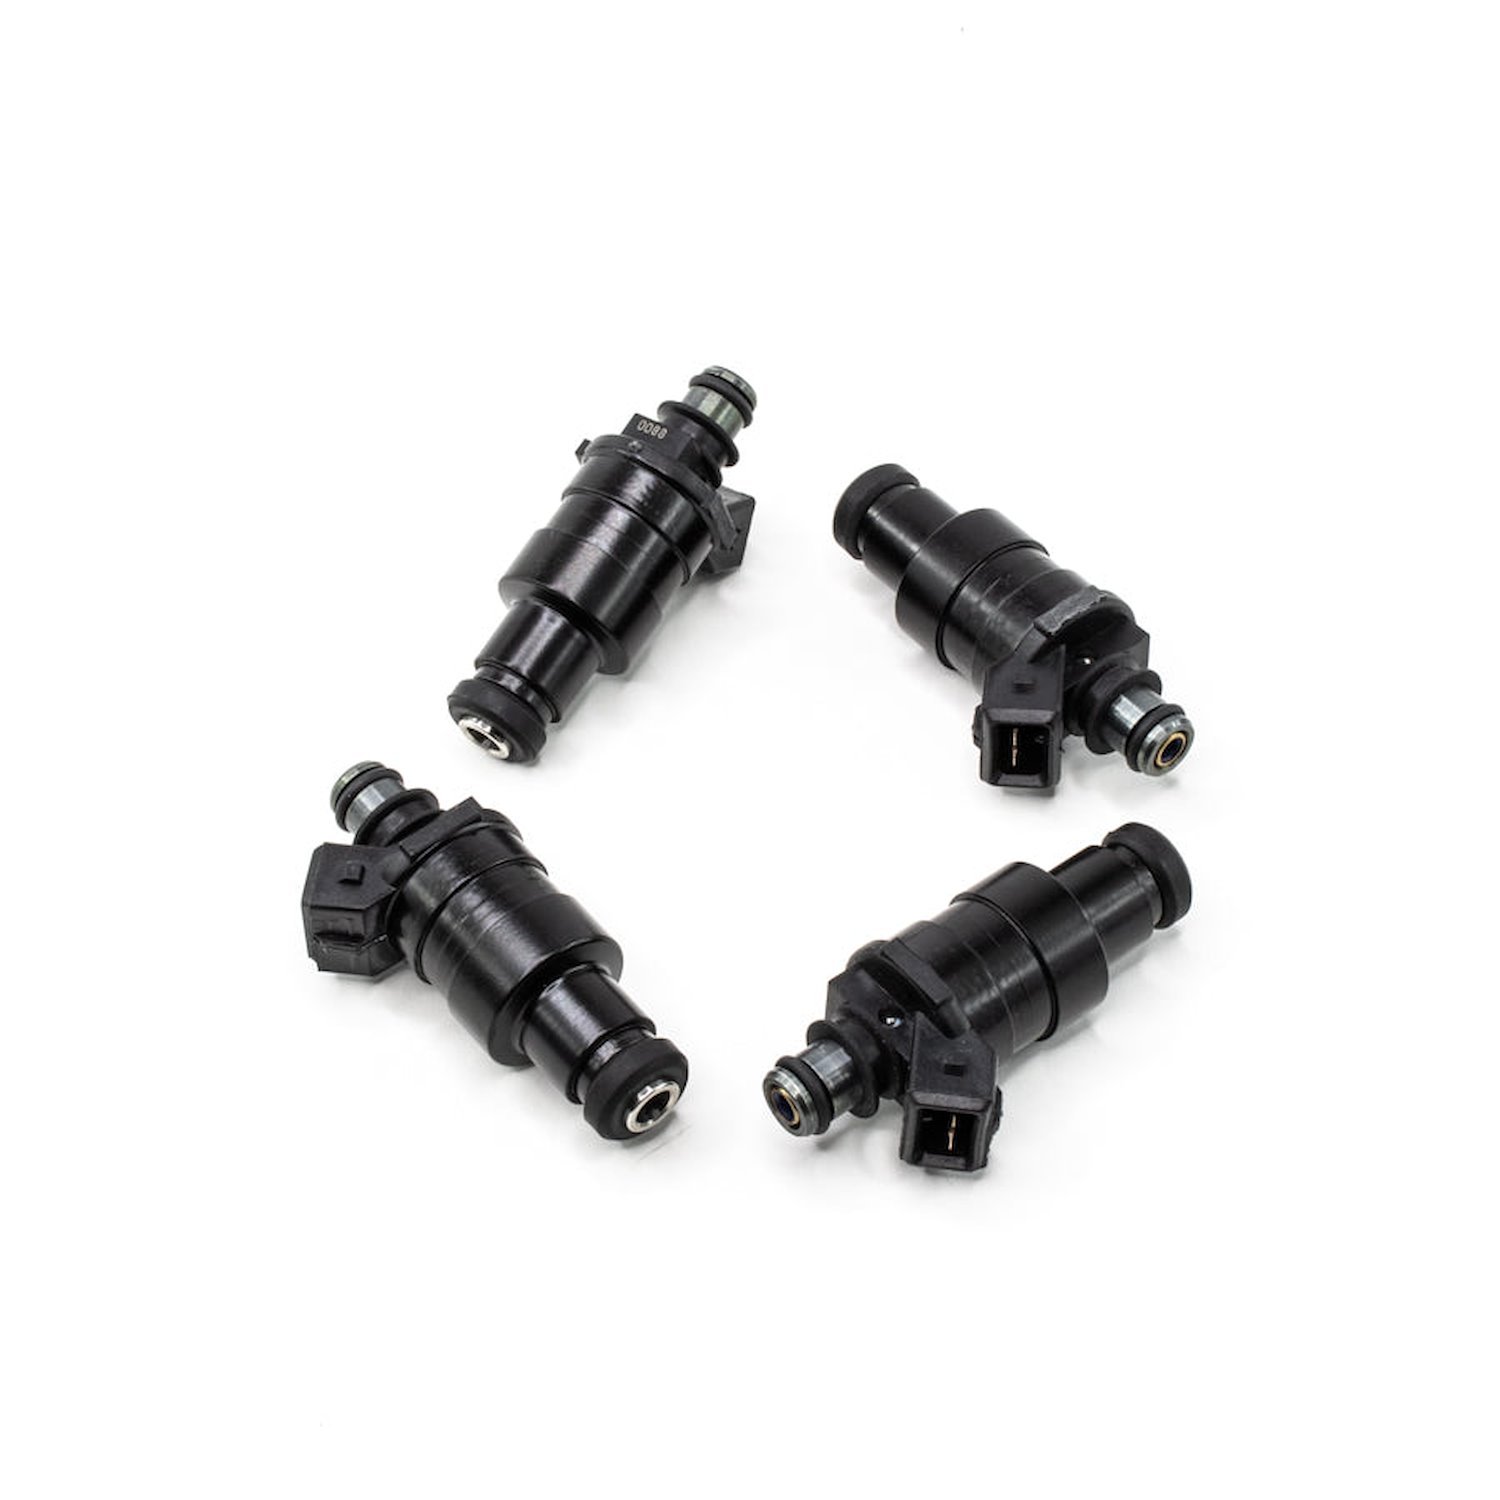 42M0212004  1200cc Low Impedance Injectors for Mitsubishi Eclipse (DSM) 4G63T 95-99 and EVO 8/9 4G63T 03-06